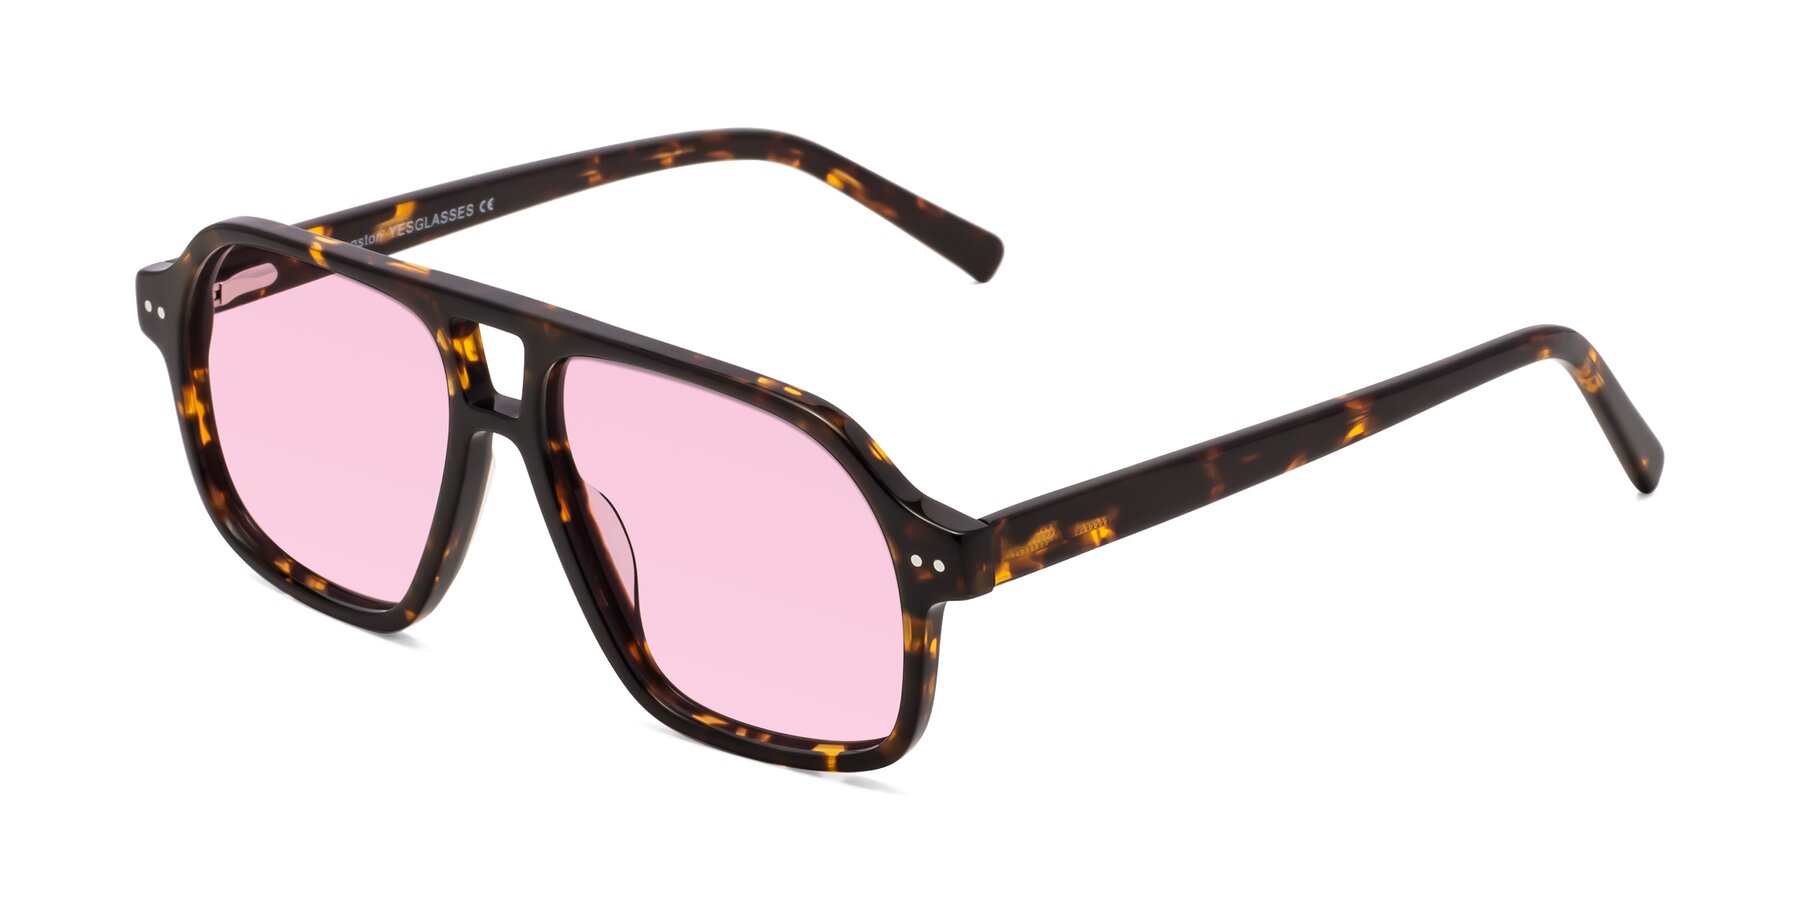 Angle of Kingston in Tortoise with Light Pink Tinted Lenses